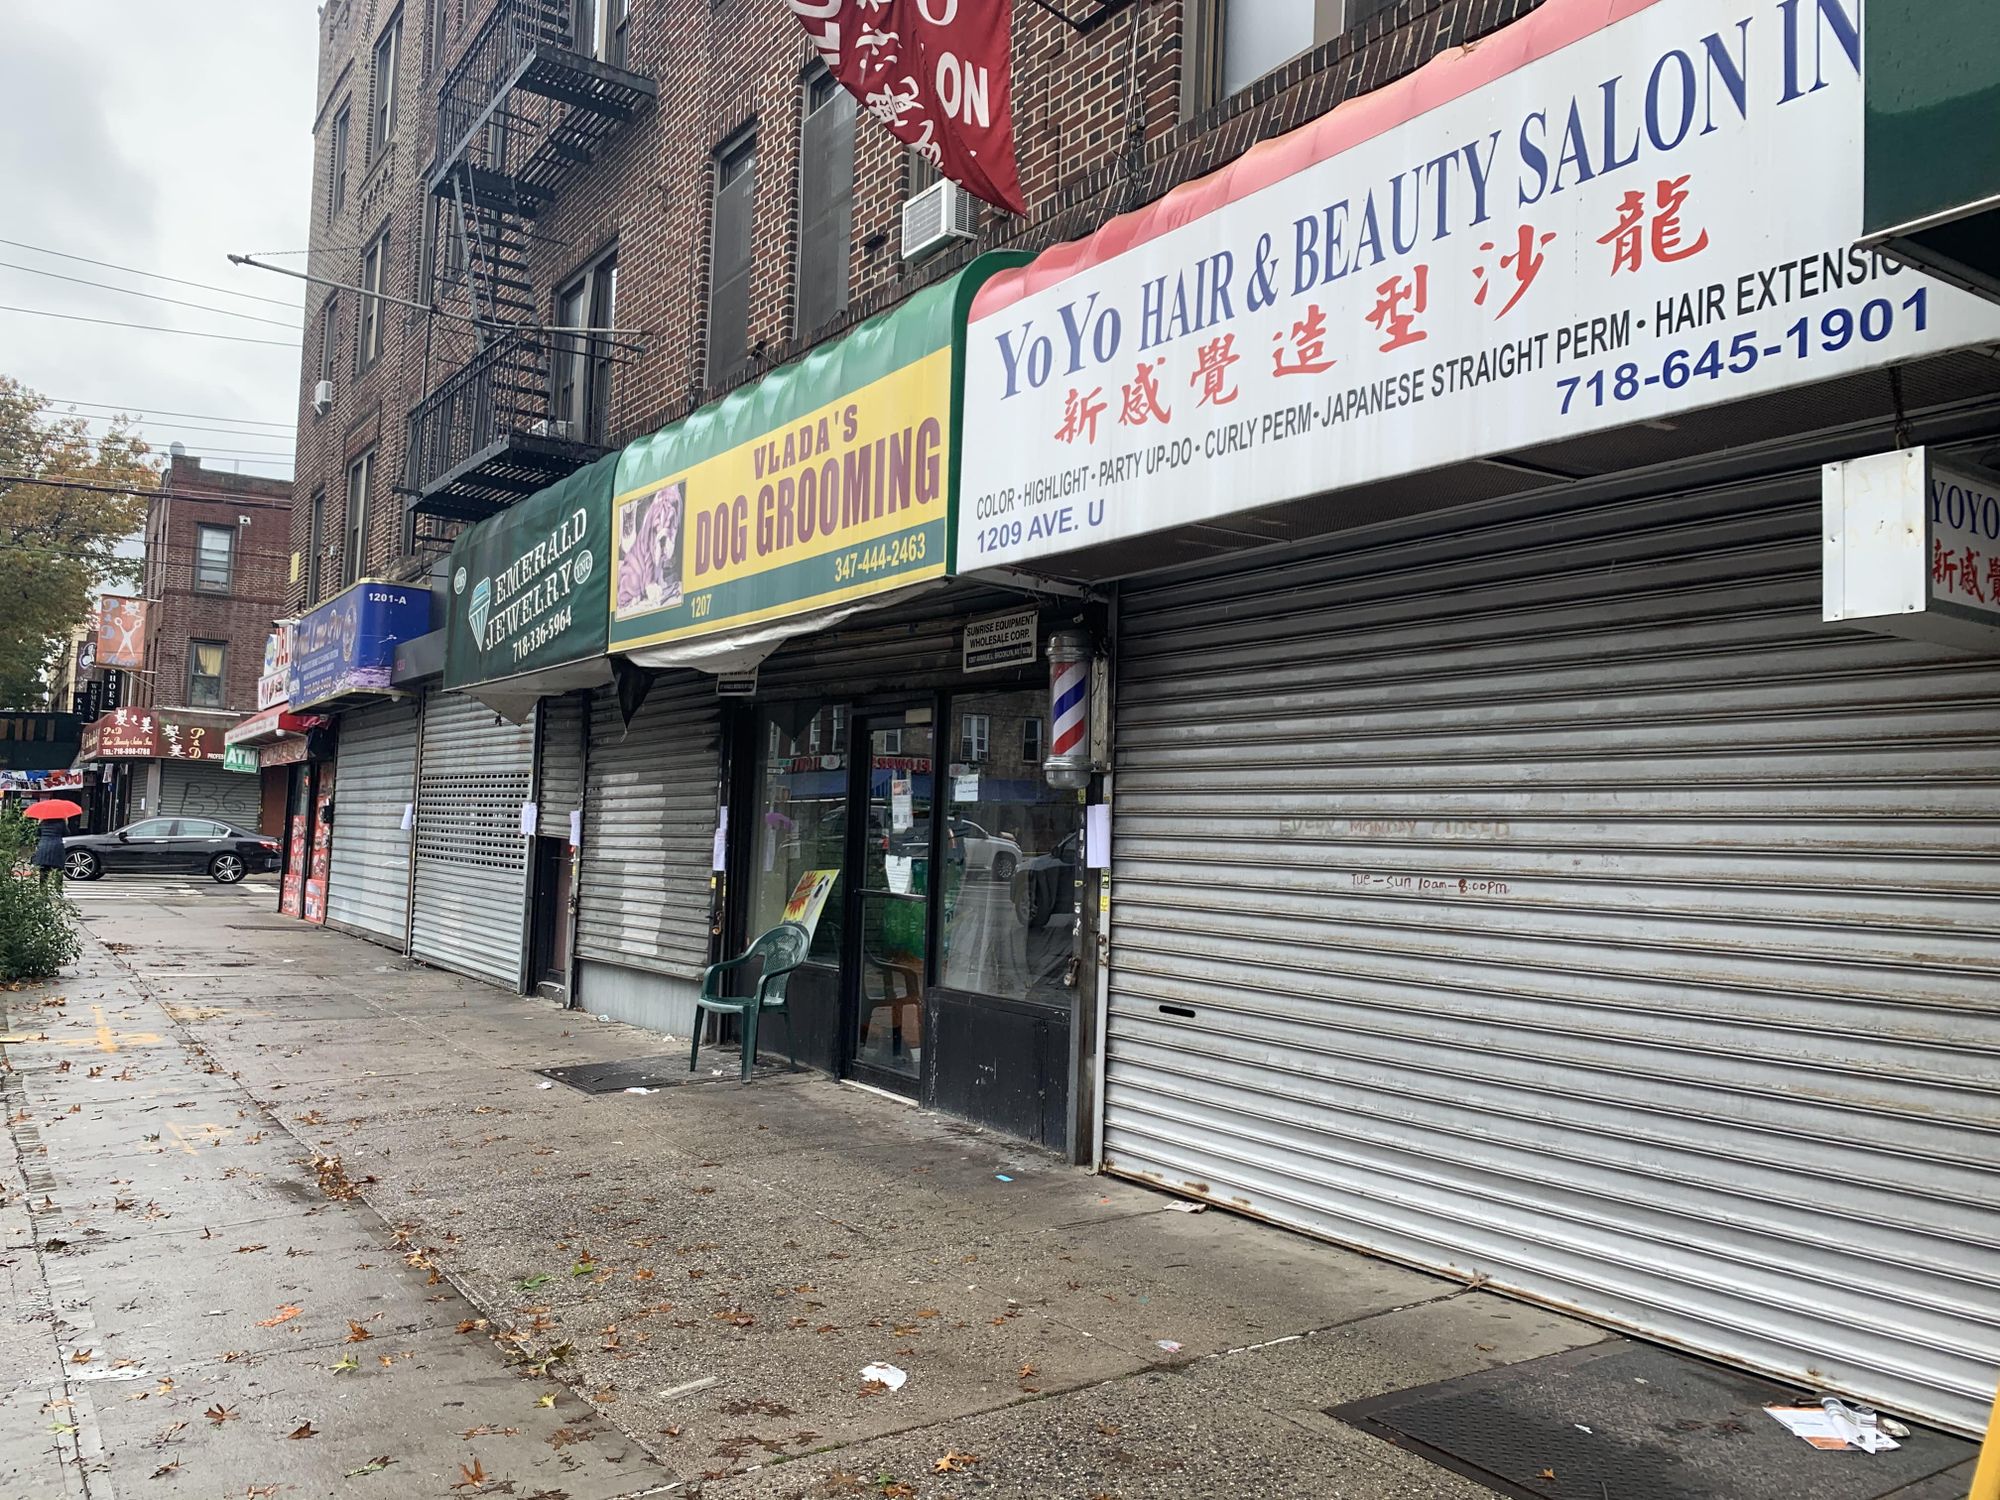 OPINION: Keeping Retail Open Must Be Part of New York’s COVID-19 Response